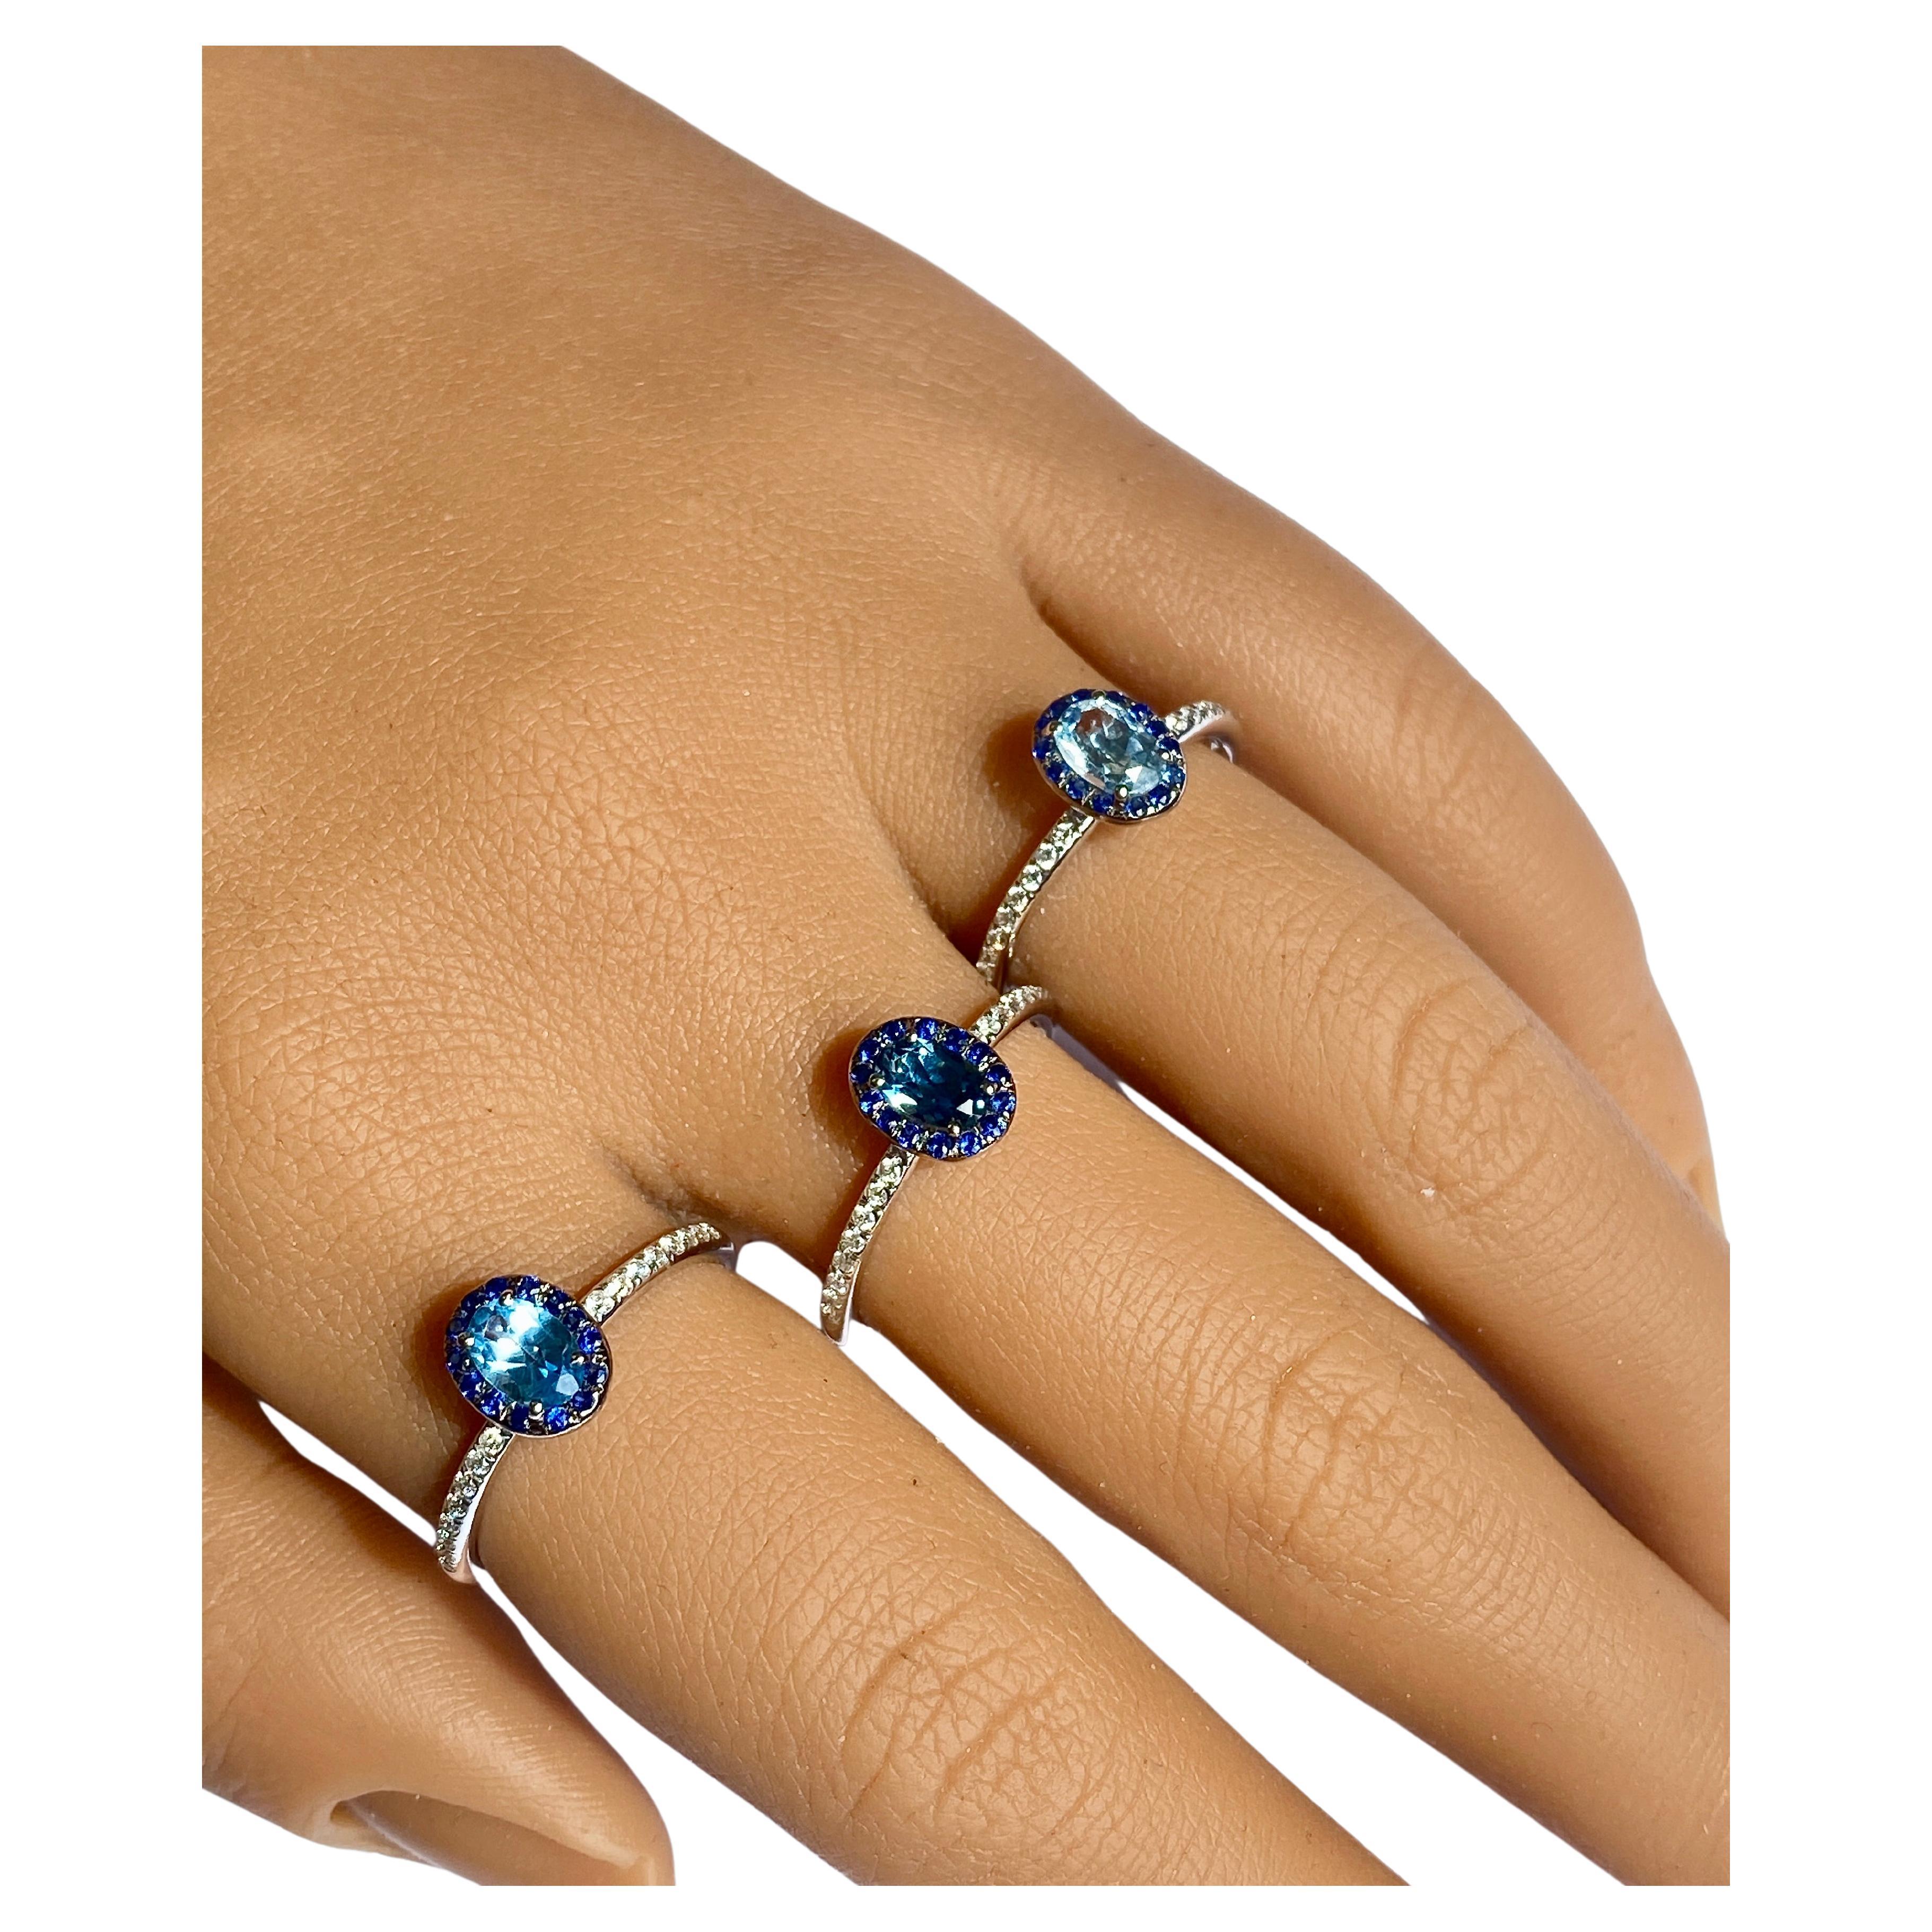 Gemstone Solitaire Ring, Stackable Diamond Rings, Blue Gemstone Solid Gold Ring 